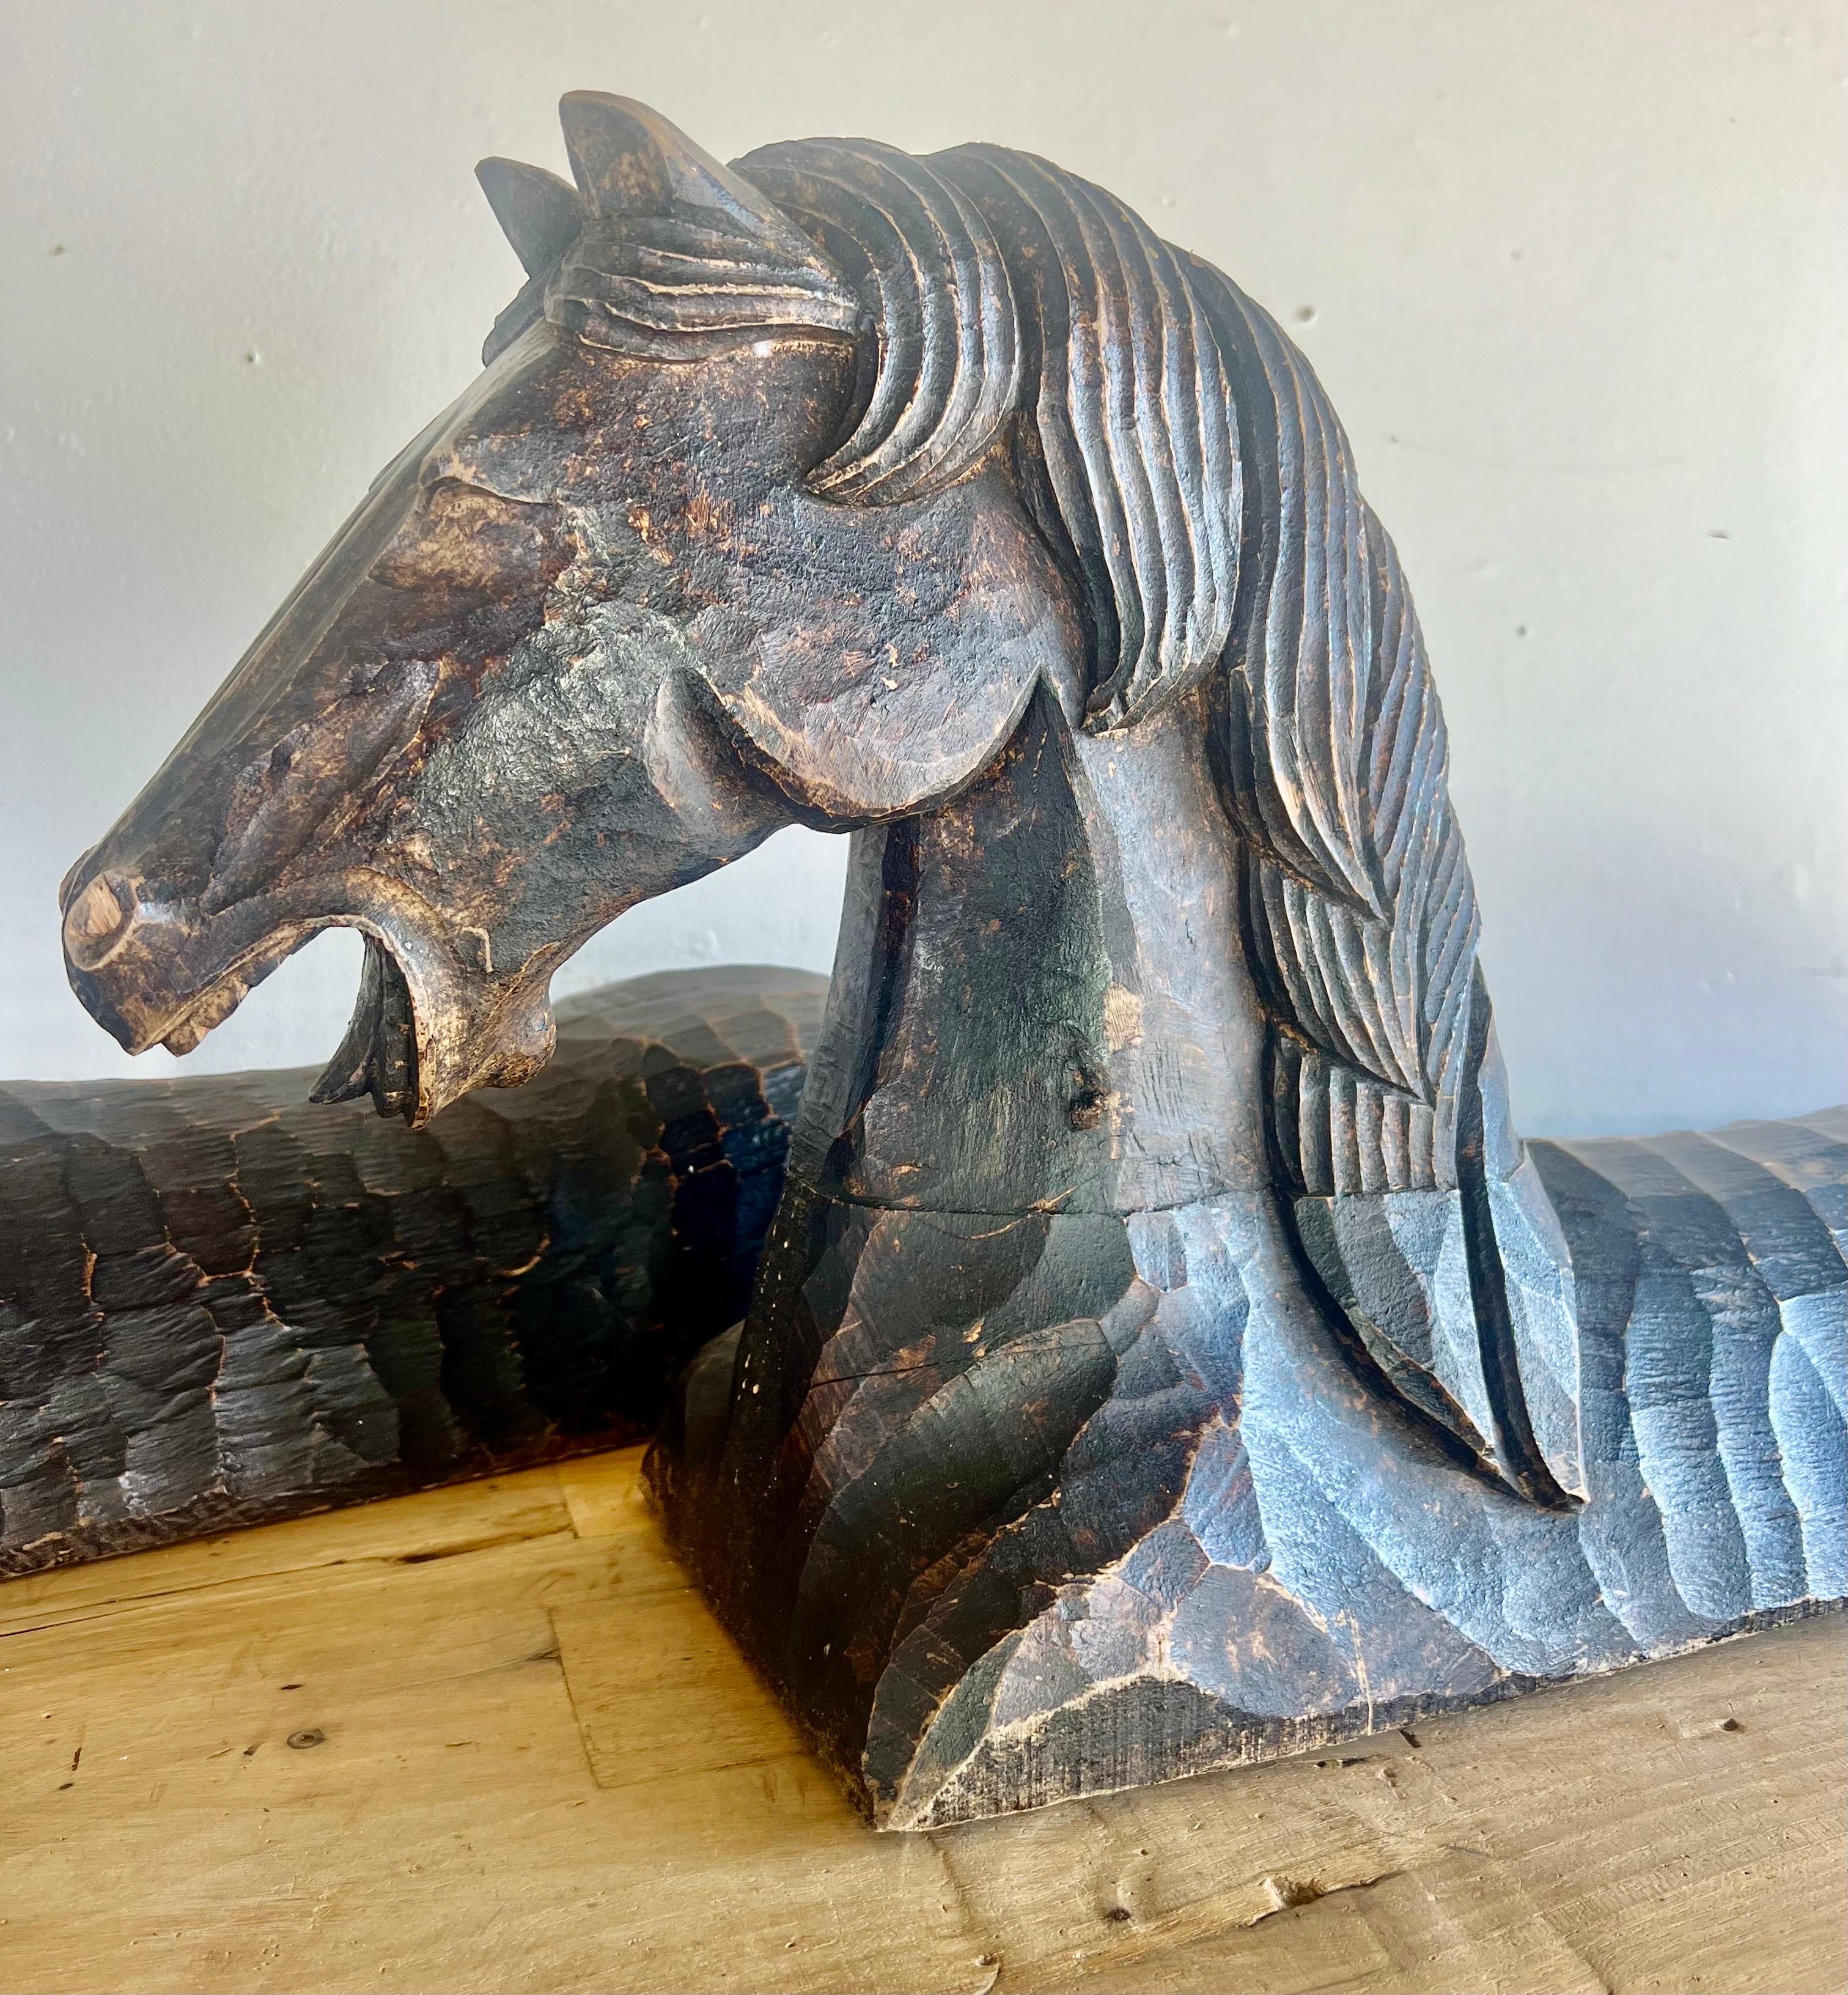 Two hand-chiseled horse sculptures with a primitive aesthetic.  Their weathered finish adds character and suggests a sense of history.  Placed on a fireplace mantel, they likely serve as rustic yet striking decorative pieces, evoking a sense of